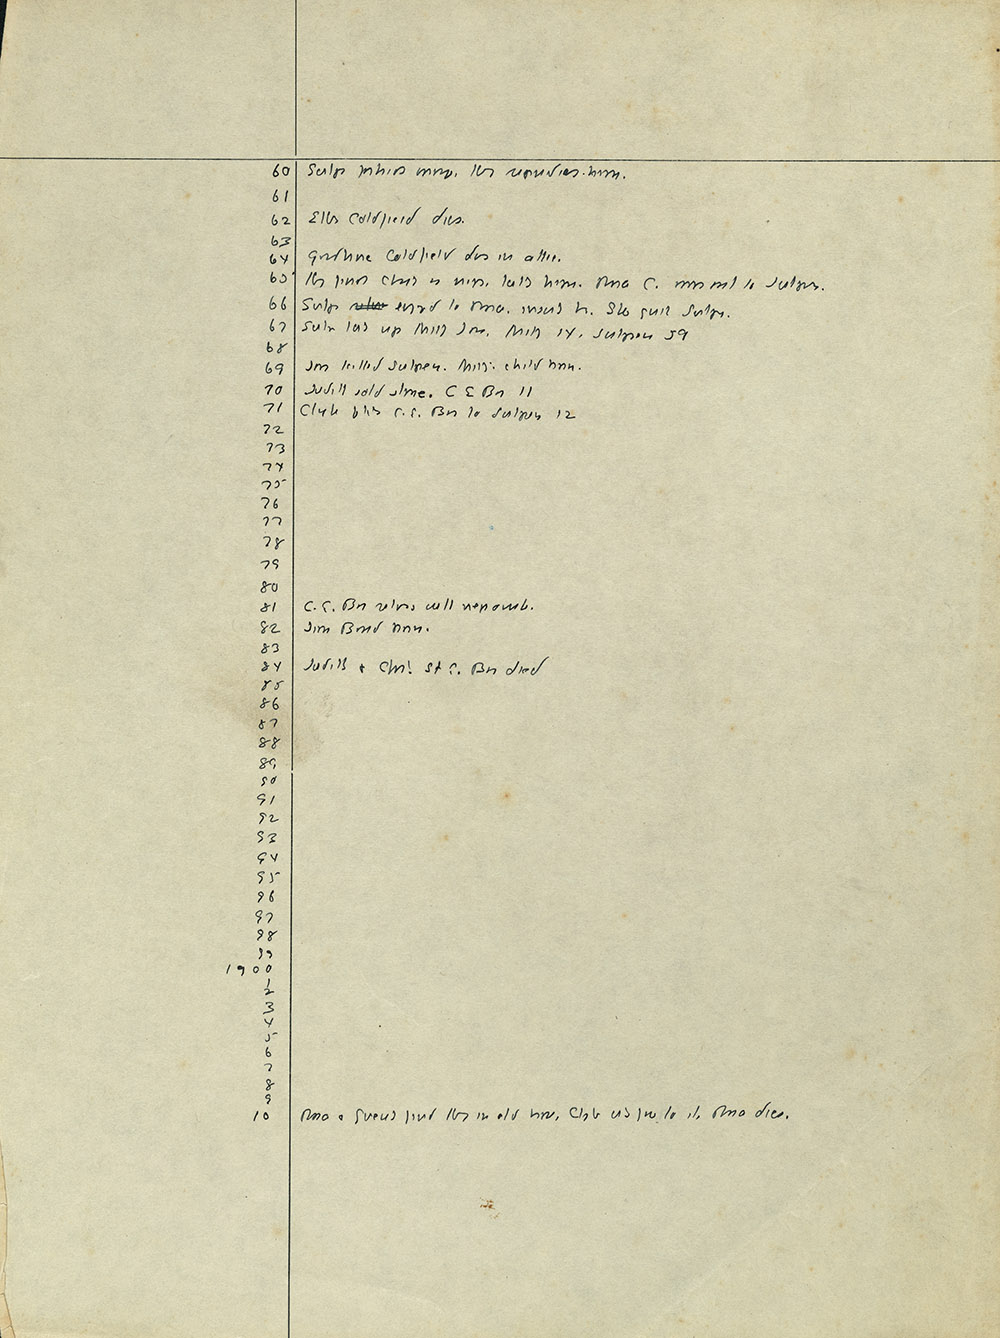 Page 2, Faulkner's Absalom Chronology